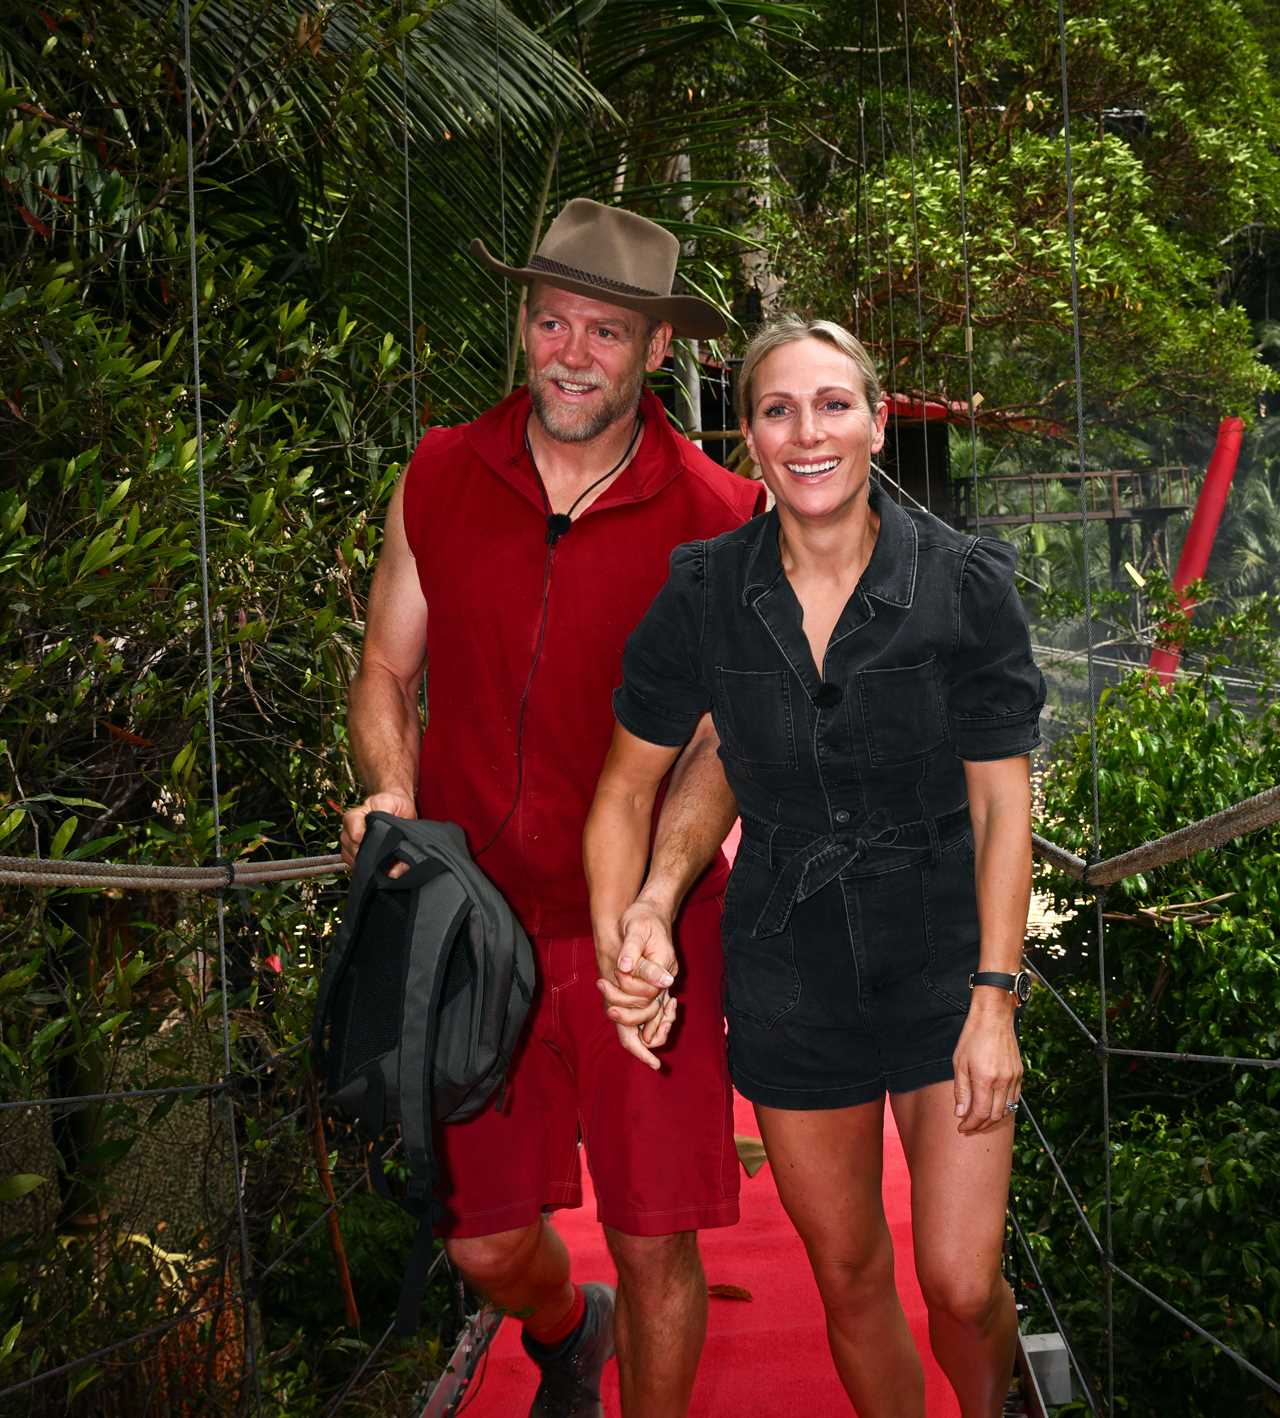 I’m A Celeb’s Mike Tindall gushes over his wife Zara in sweet post